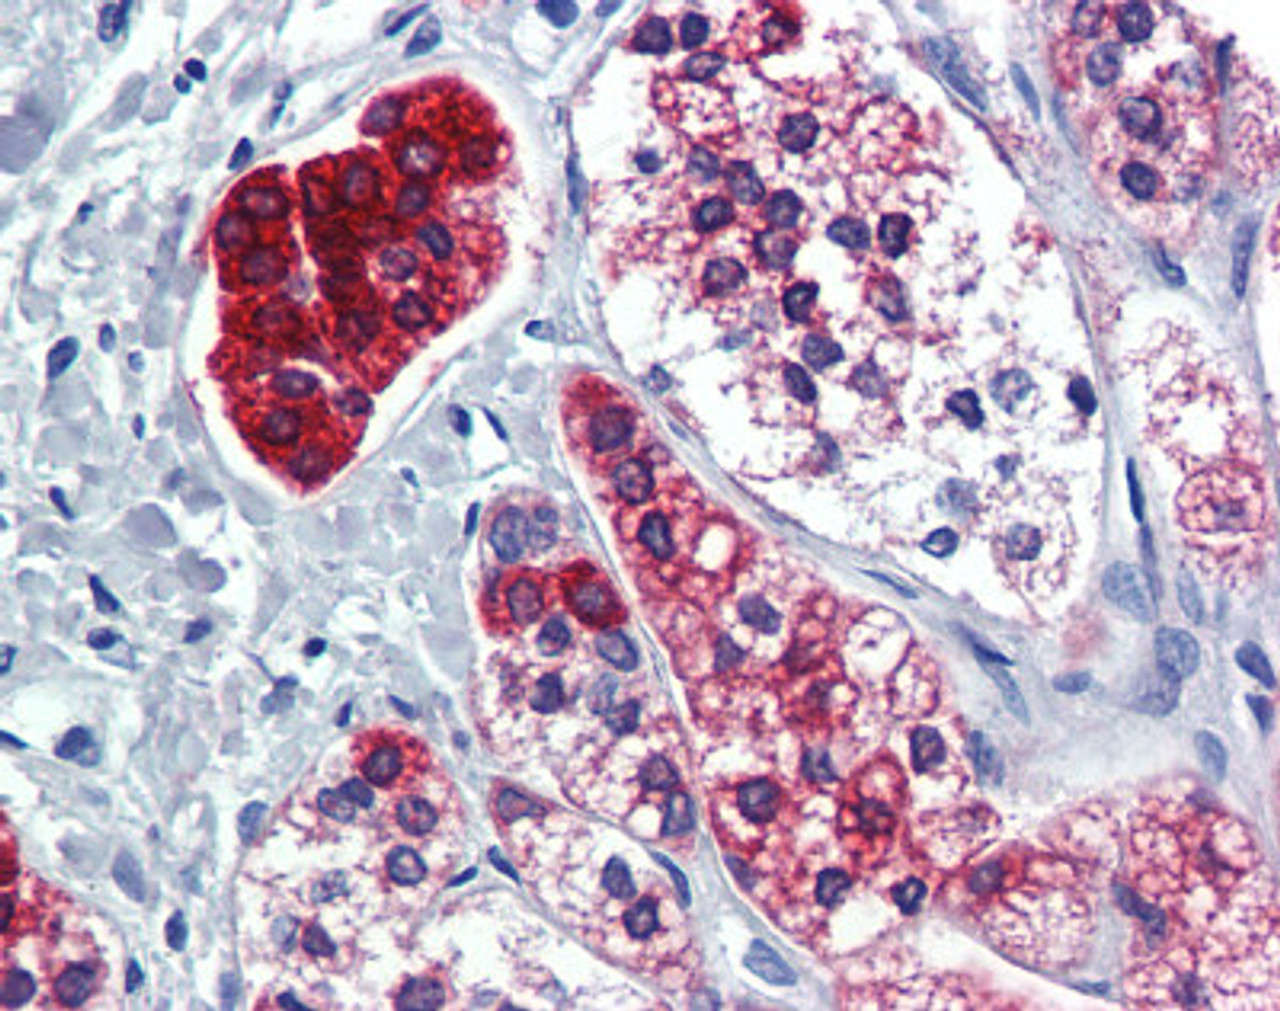 Immunohistochemistry of human adrenal tissue stained using PPARG Monoclonal Antibody.